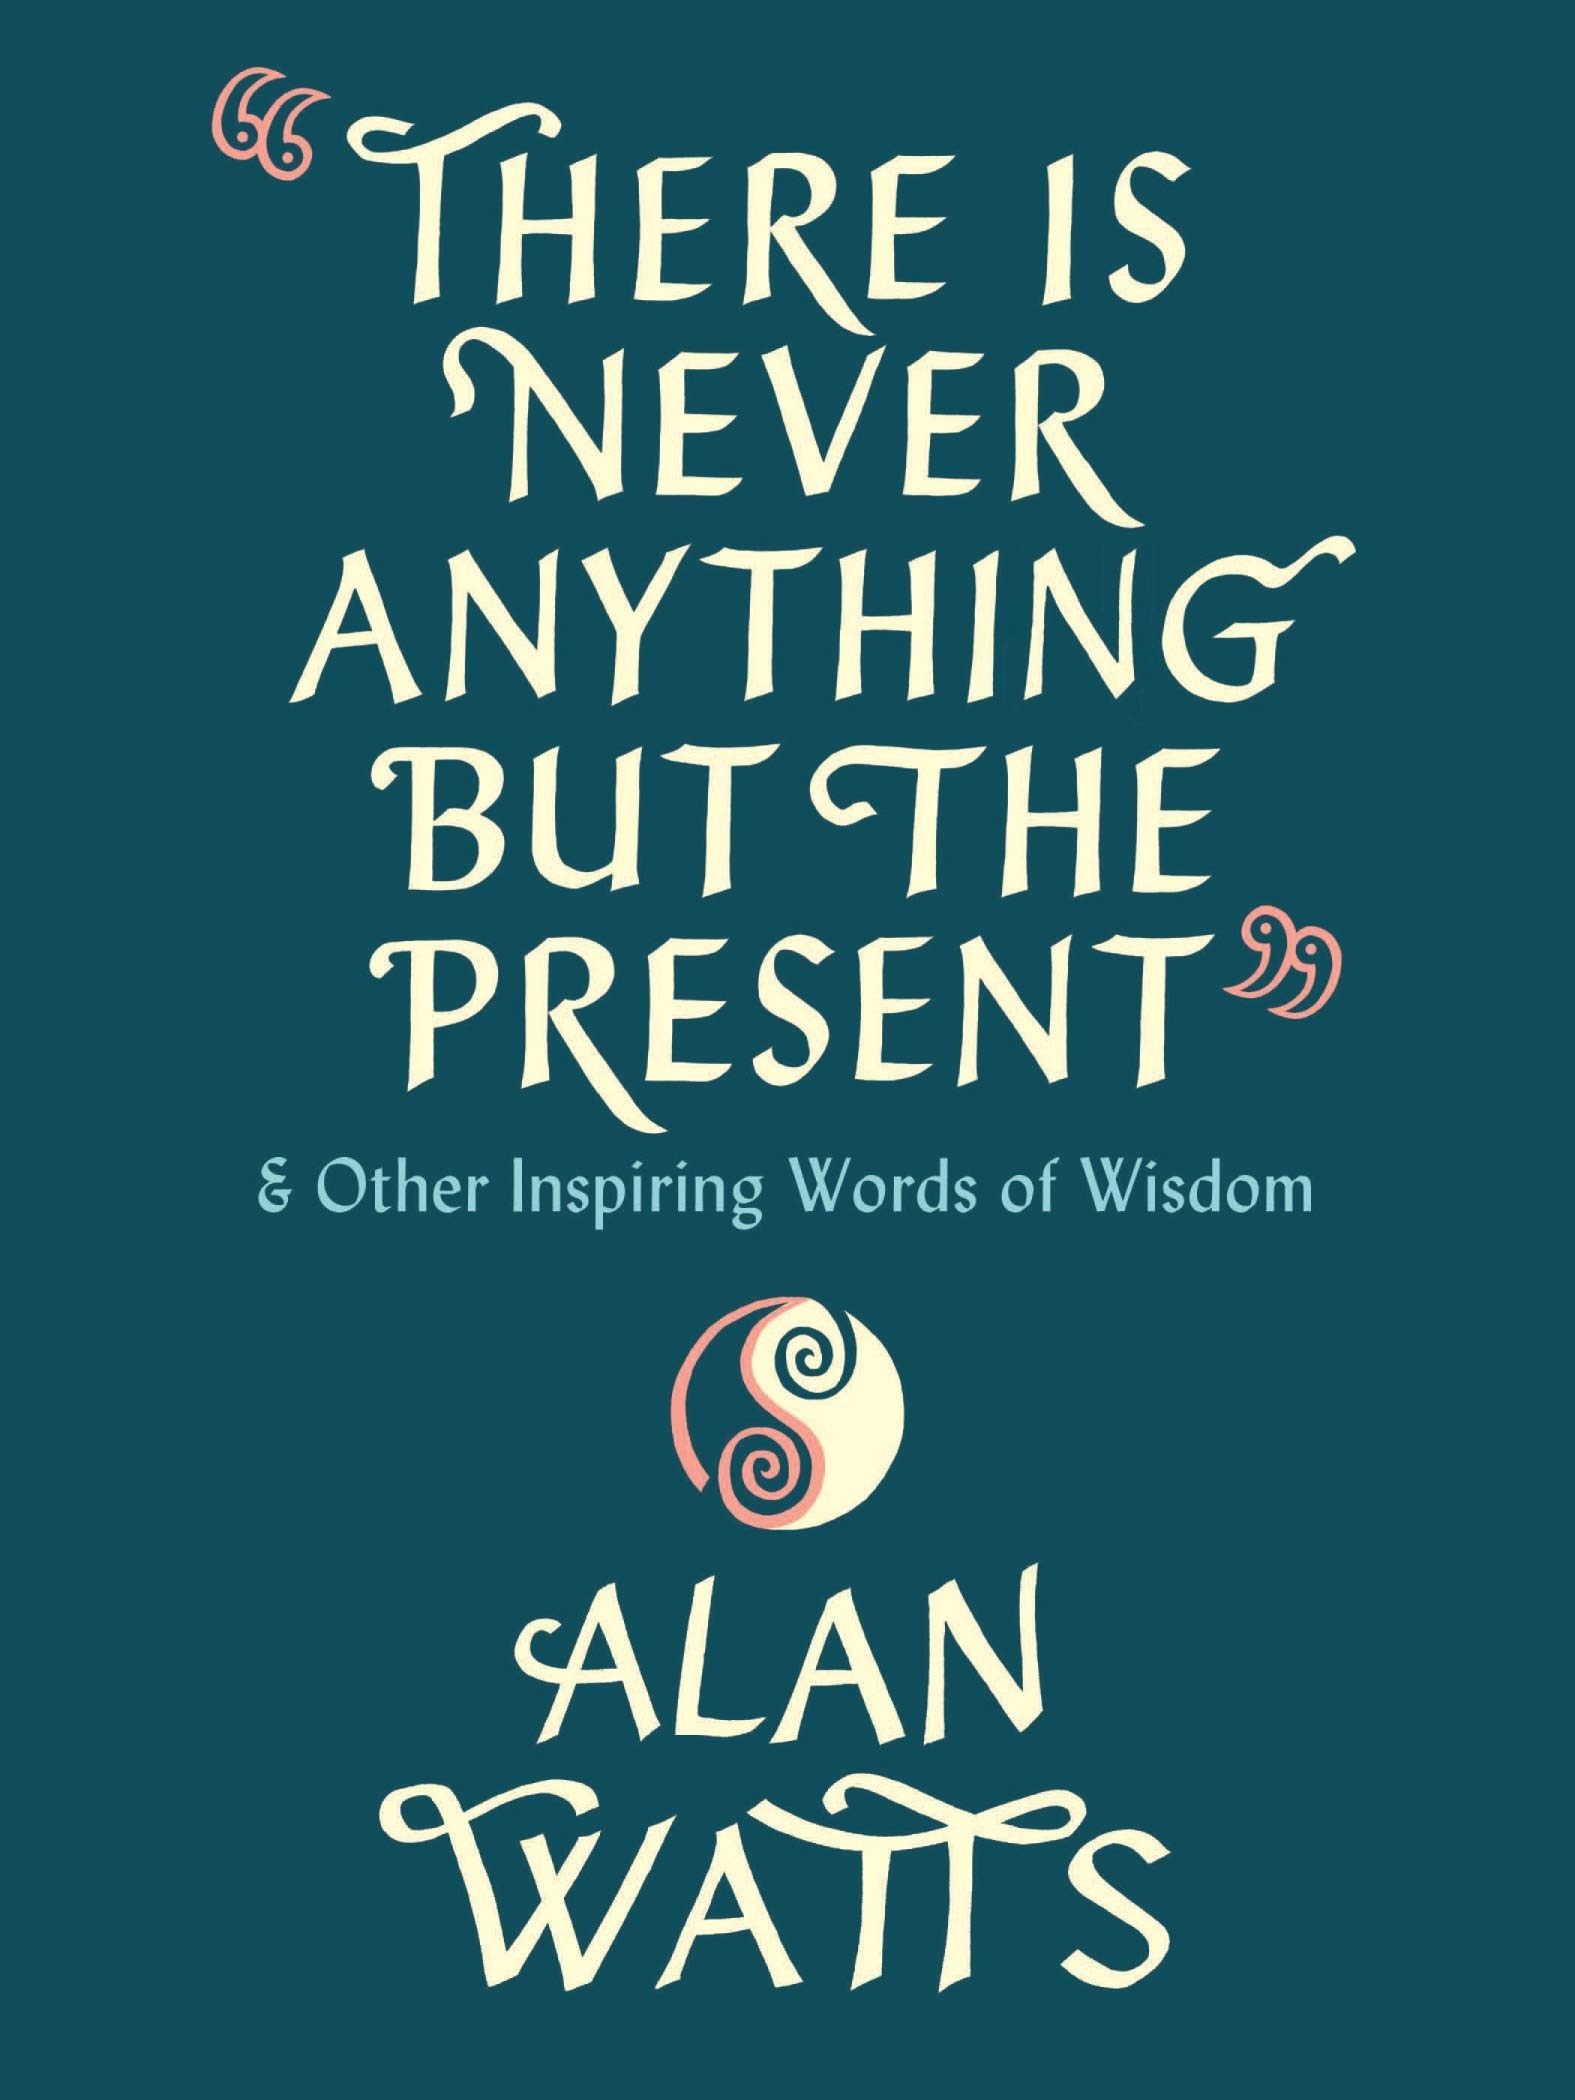 Book “There Is Never Anything But The Present” by Alan Watts — December 9, 2021